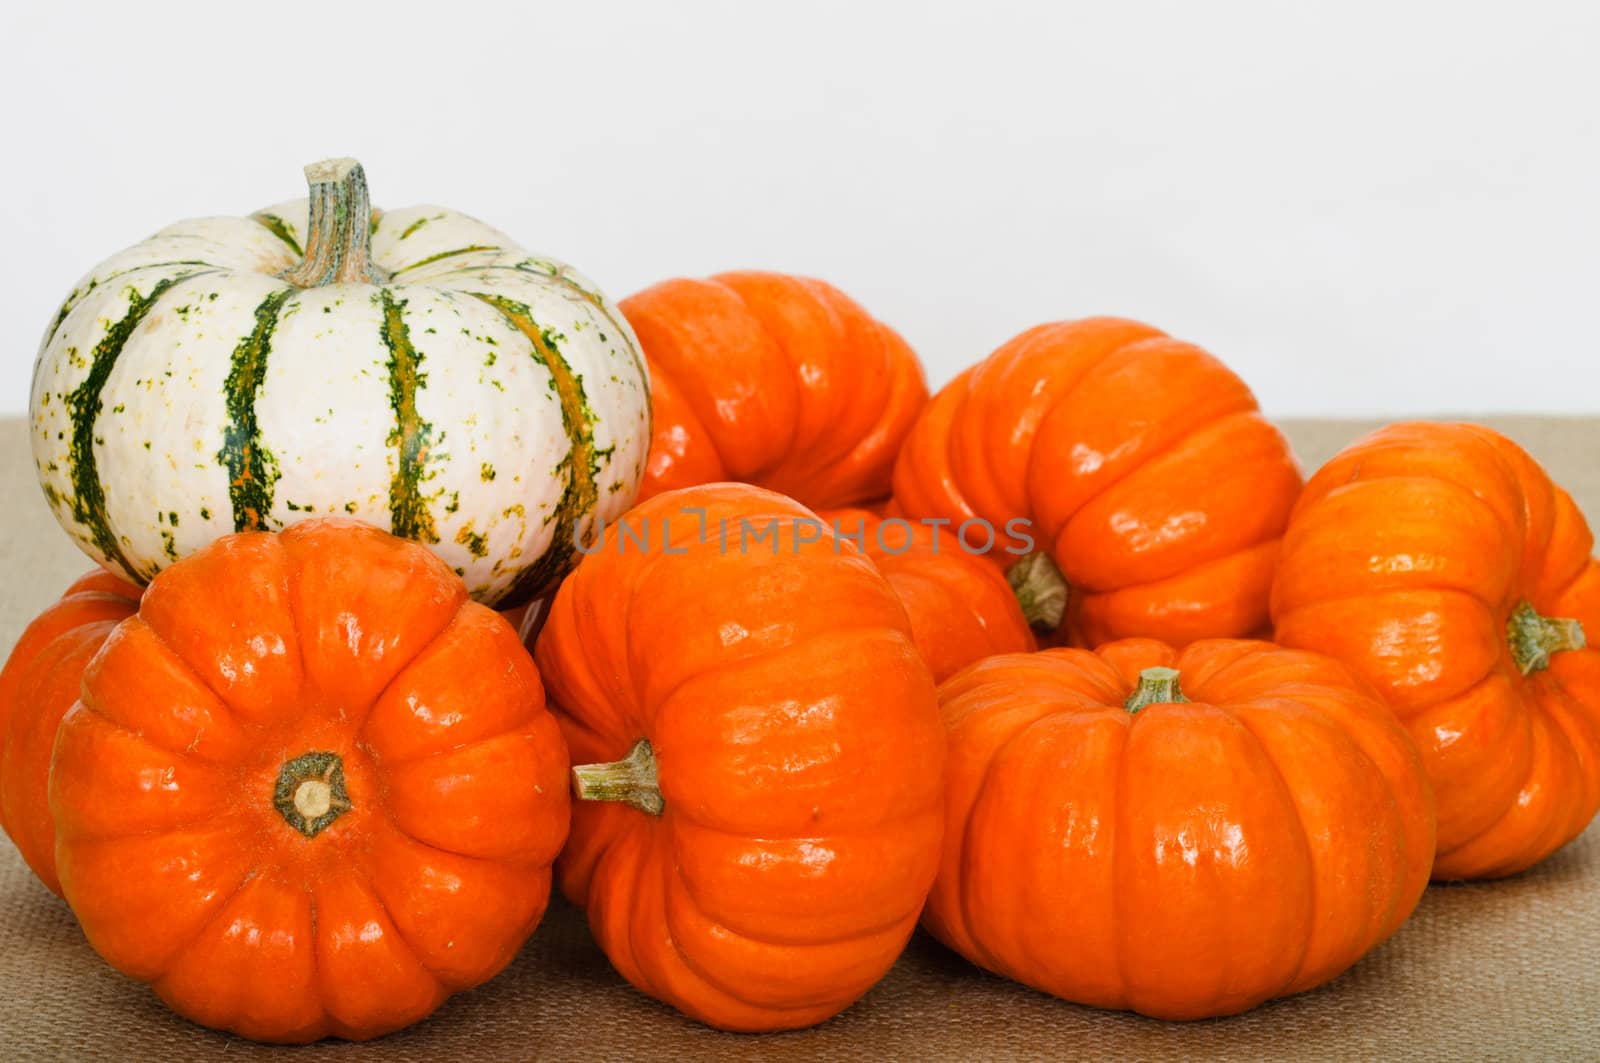 Close up composition of pumpkins, nuts and corns on the table.